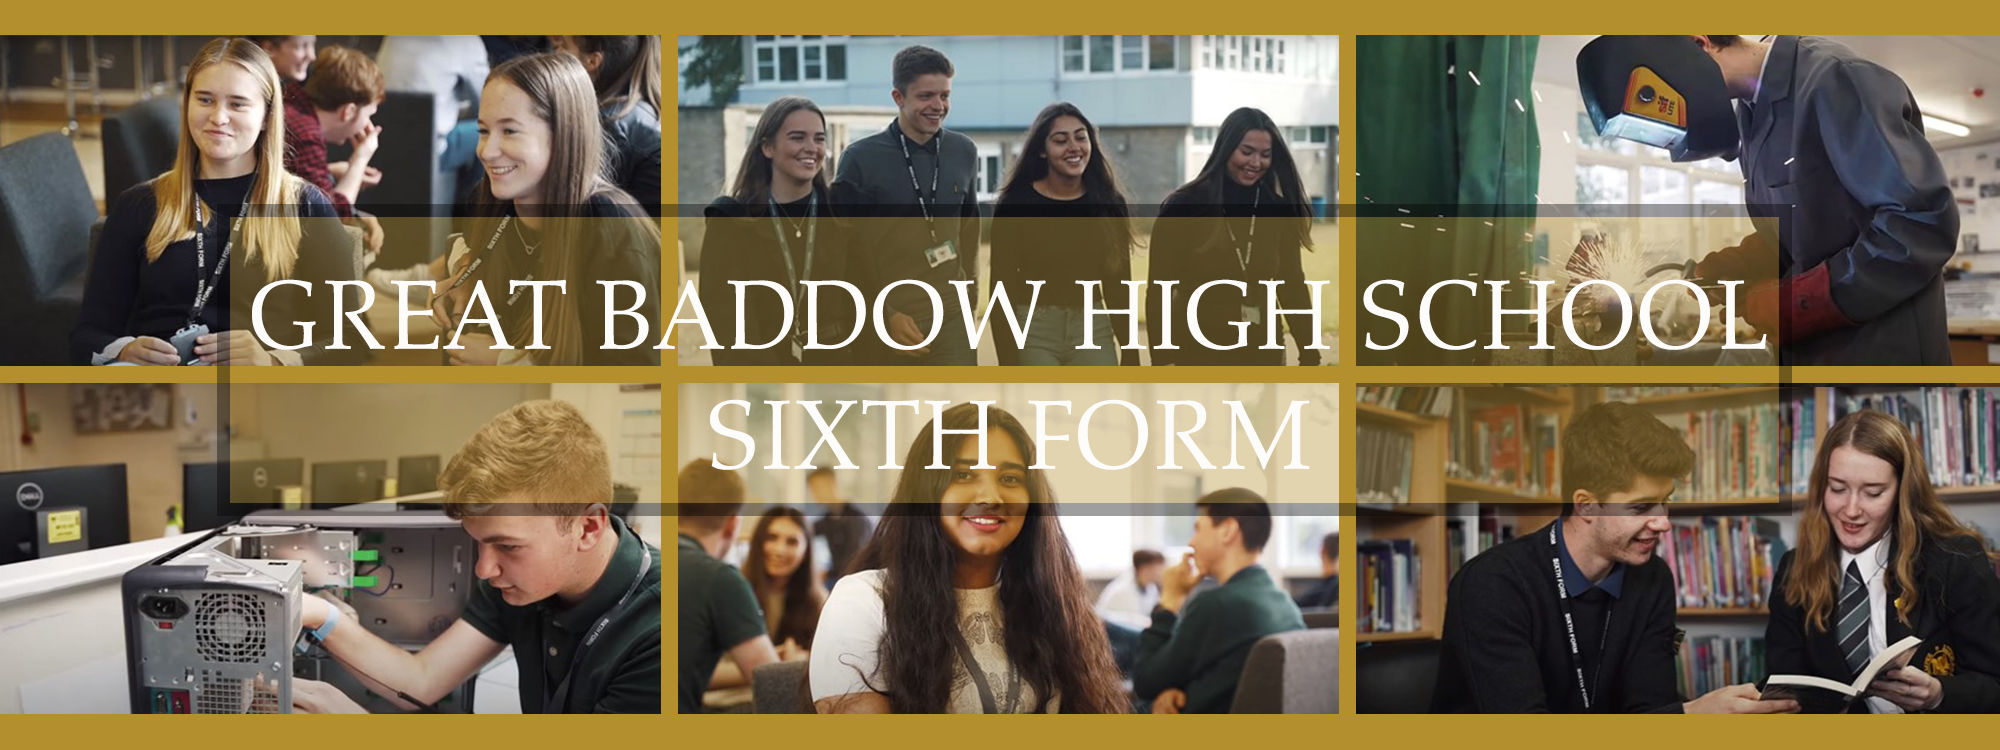 Sixth Form Banner 2 Image 10.11.20